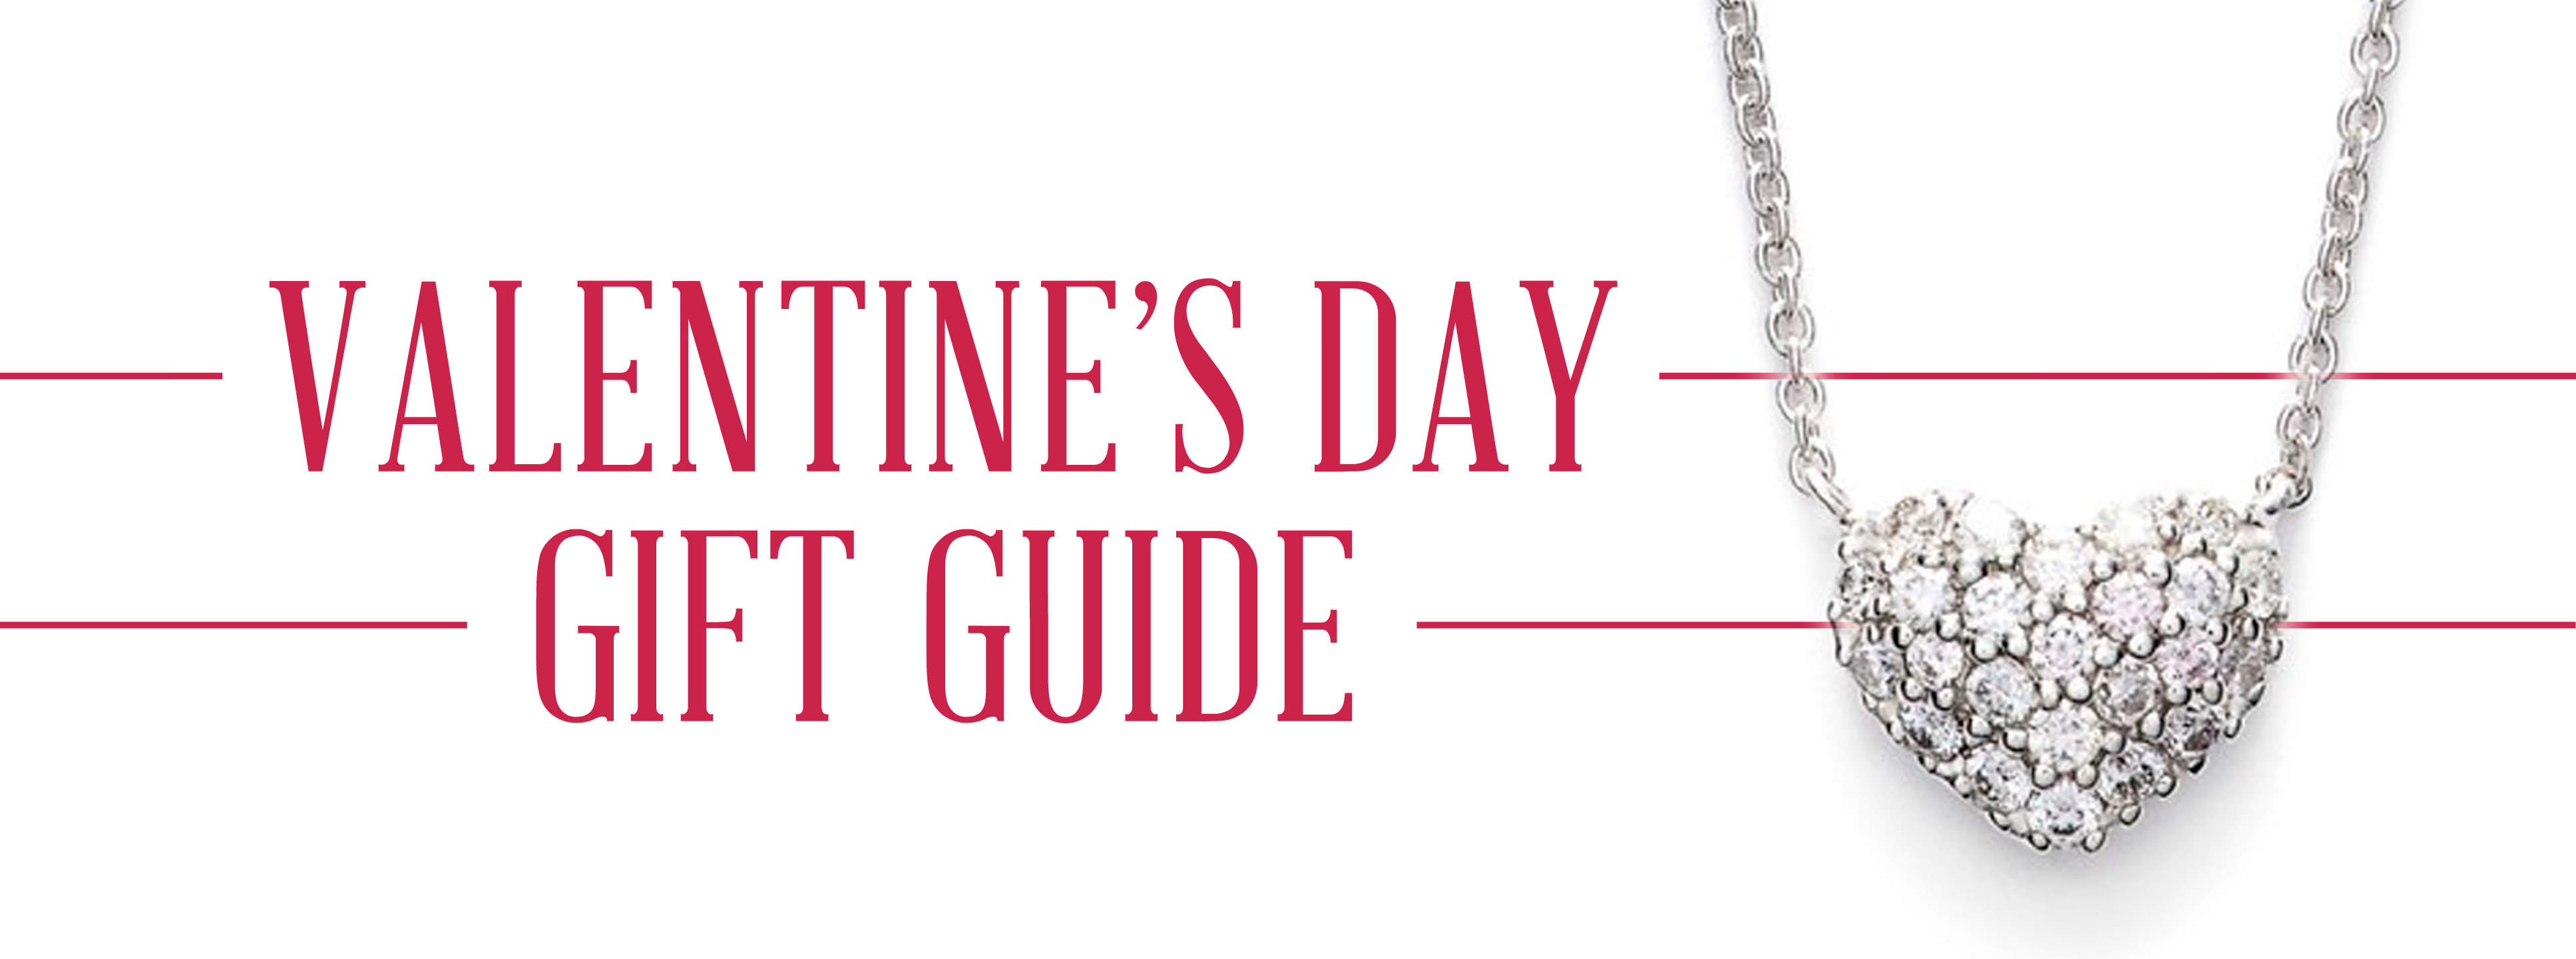 valentines day gift guide 2017